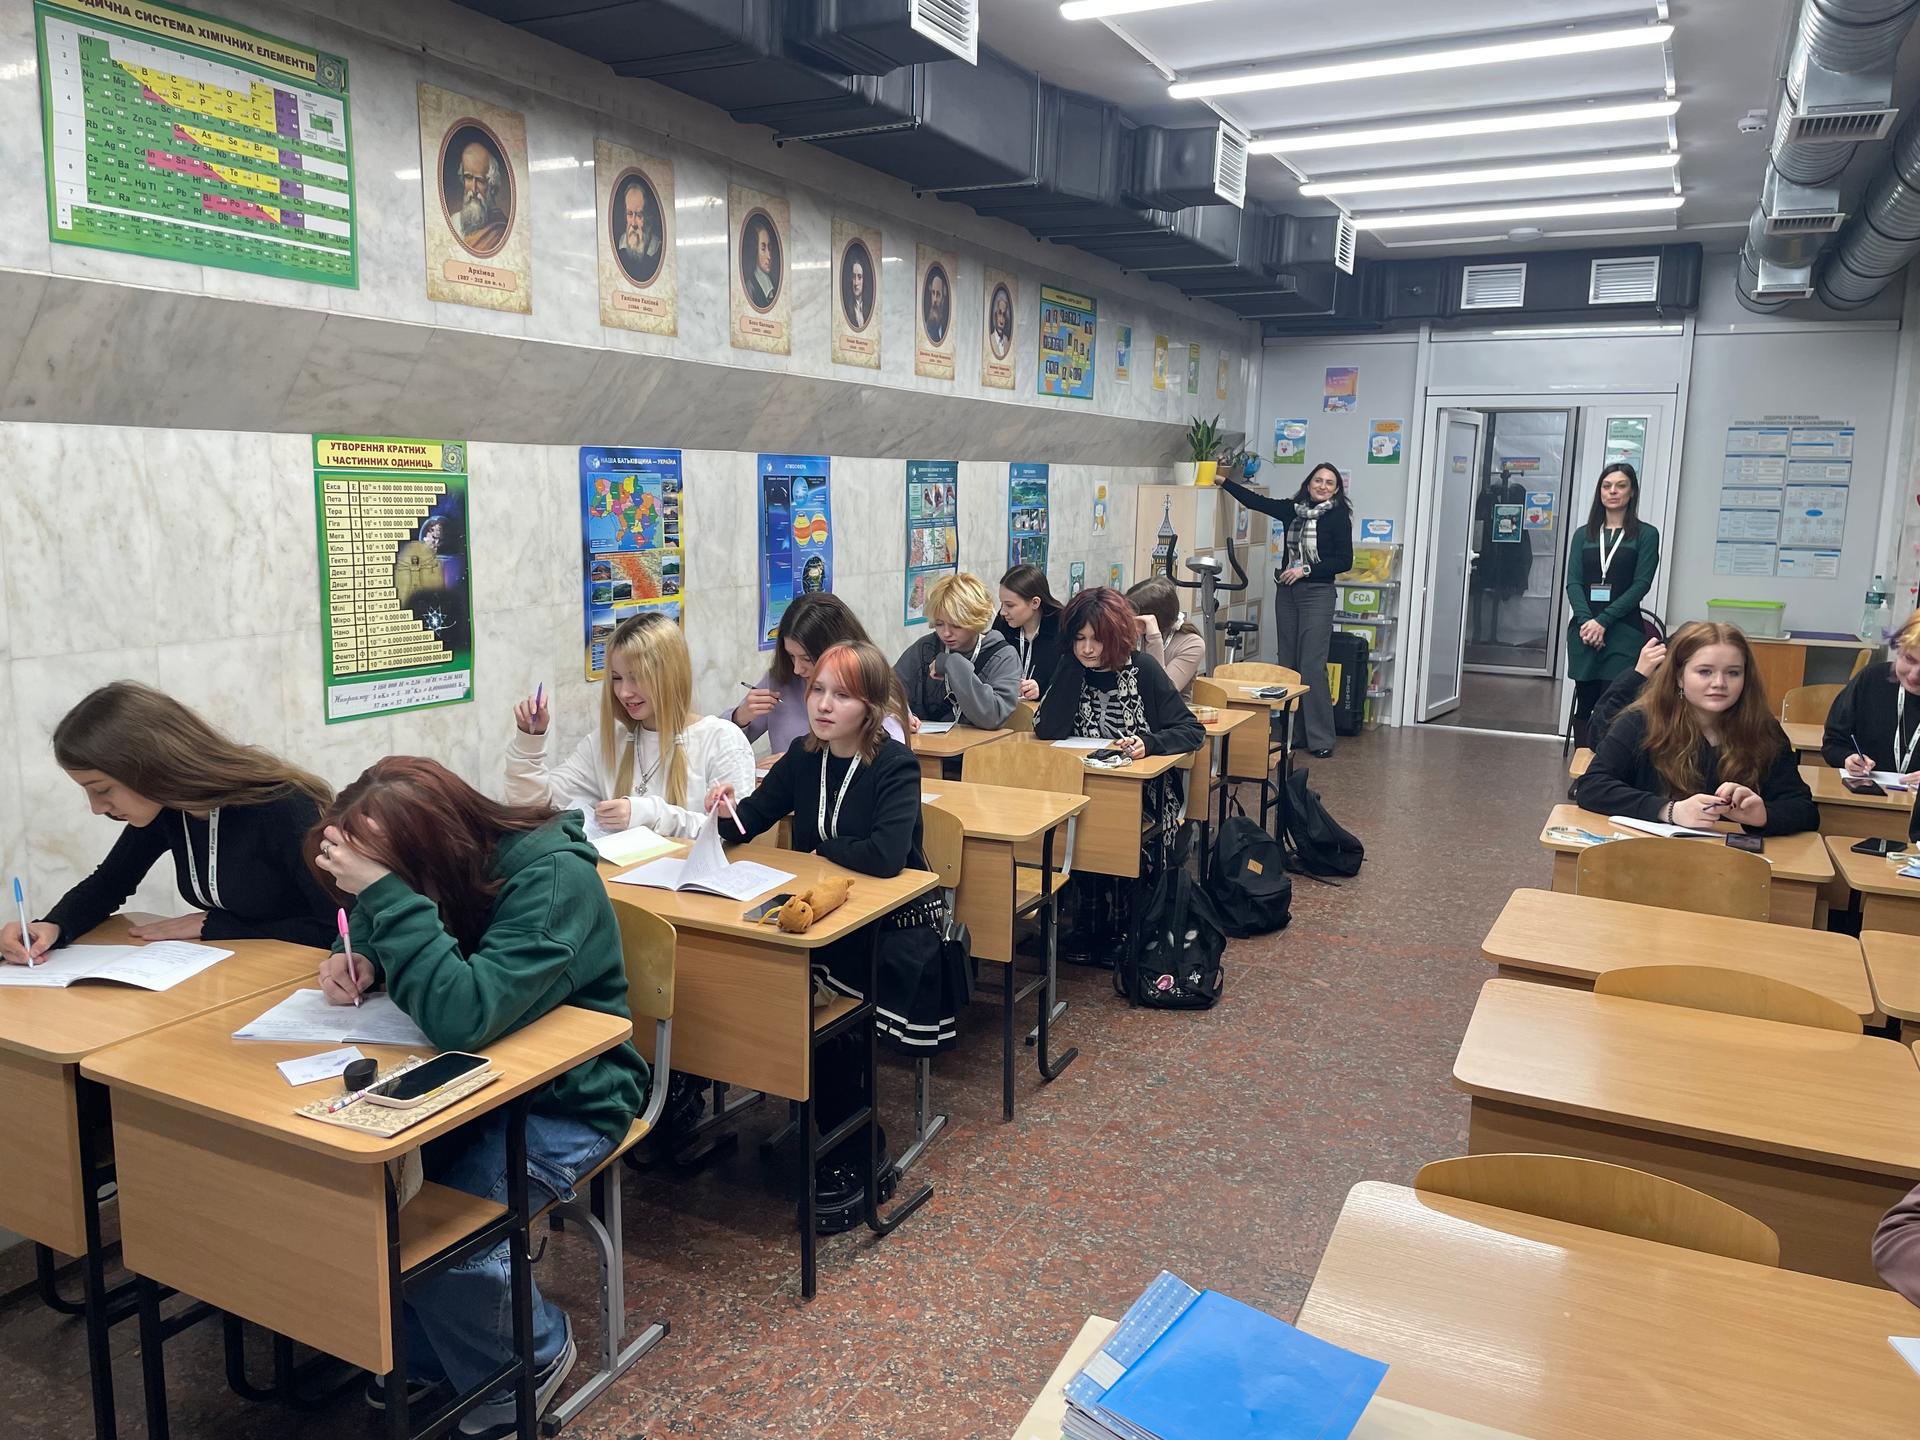 These students are in a classroom within Kharkiv's underground school system, which launched to protect students from Russian attacks in a city by the frontlines. 